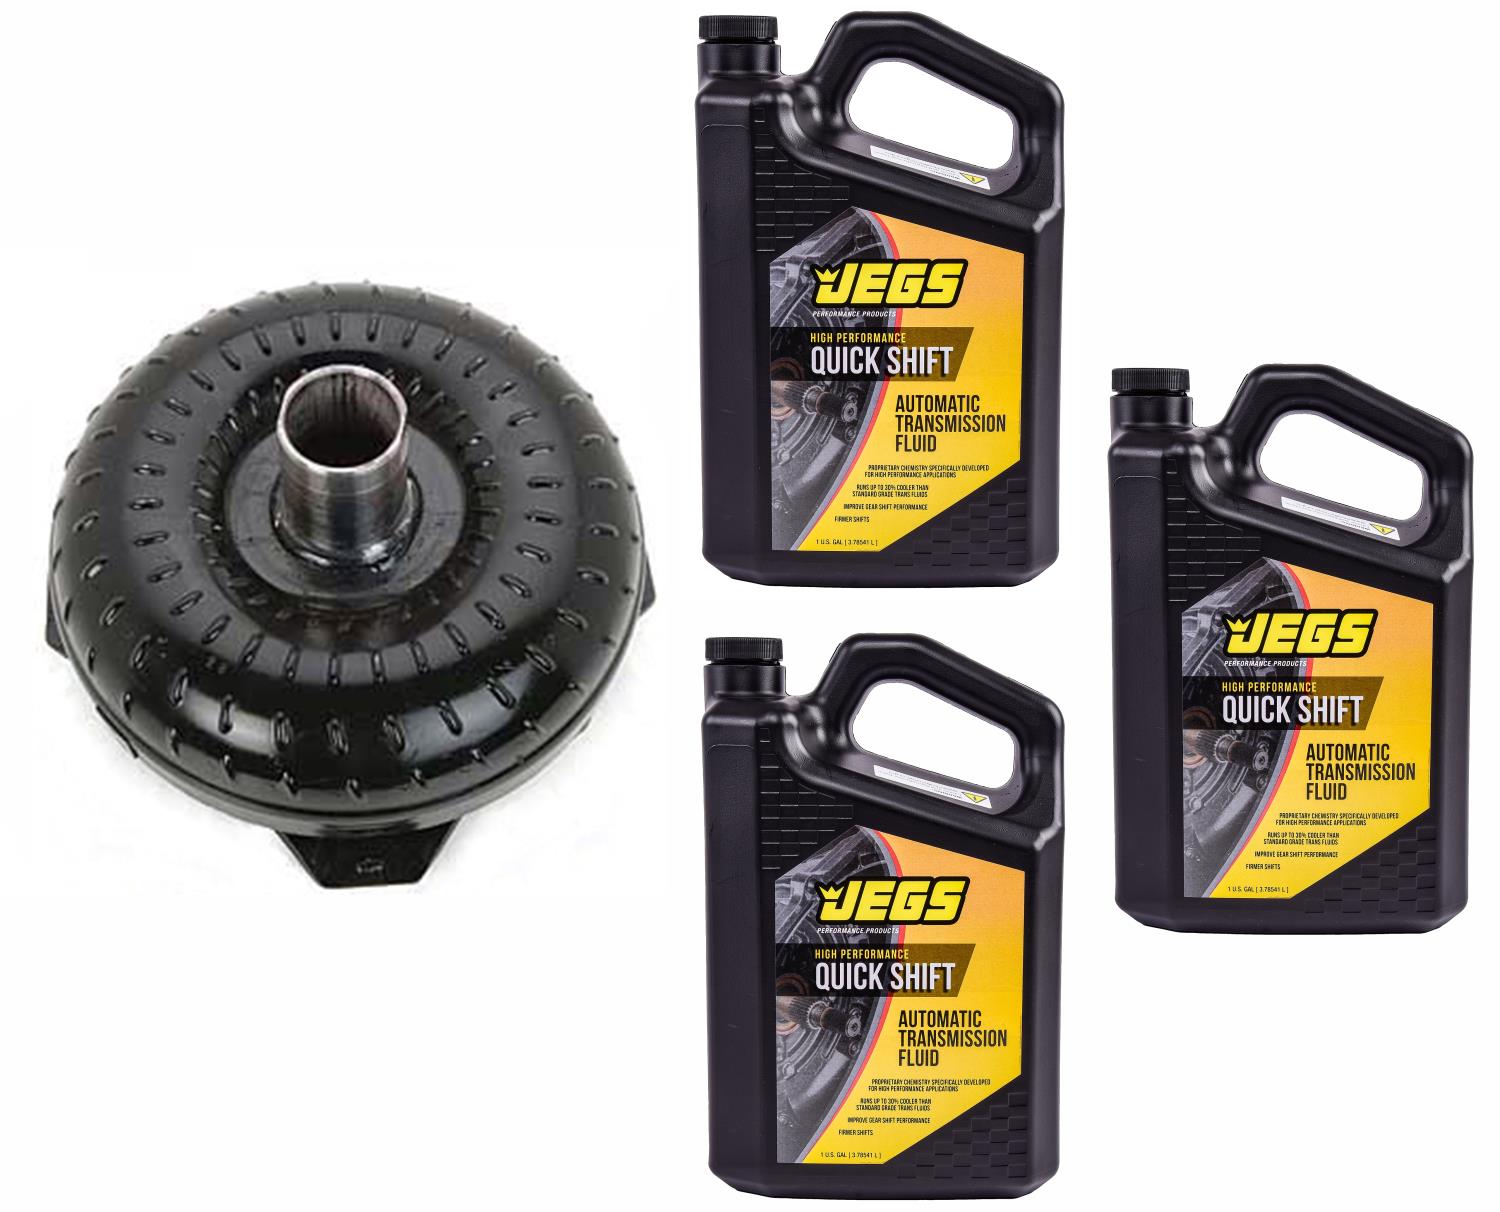 Torque Converter & Transmission Fluid Kit for Ford C4 [10 in. Dia. & 2300-2500 RPM Stall Speed]